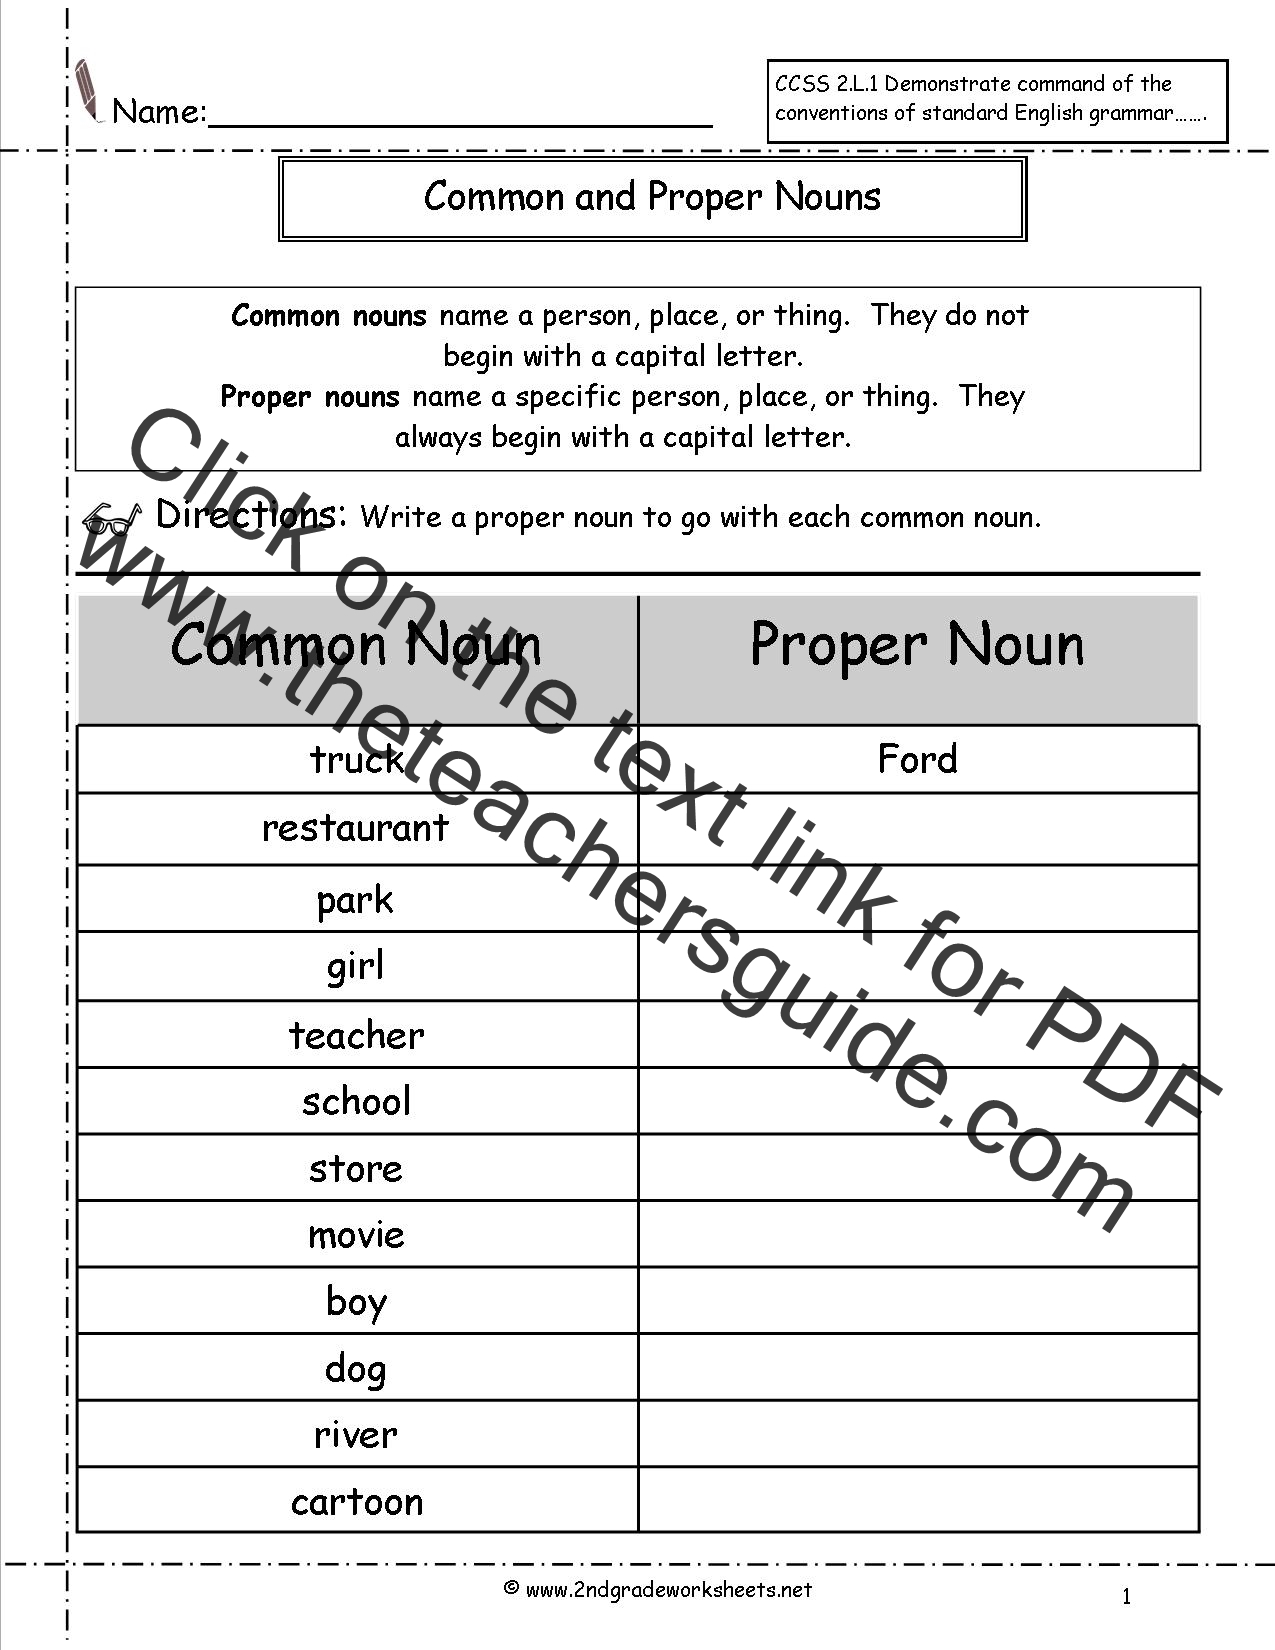 Common and Proper Nouns Worksheet Throughout Proper Nouns Worksheet 2nd Grade